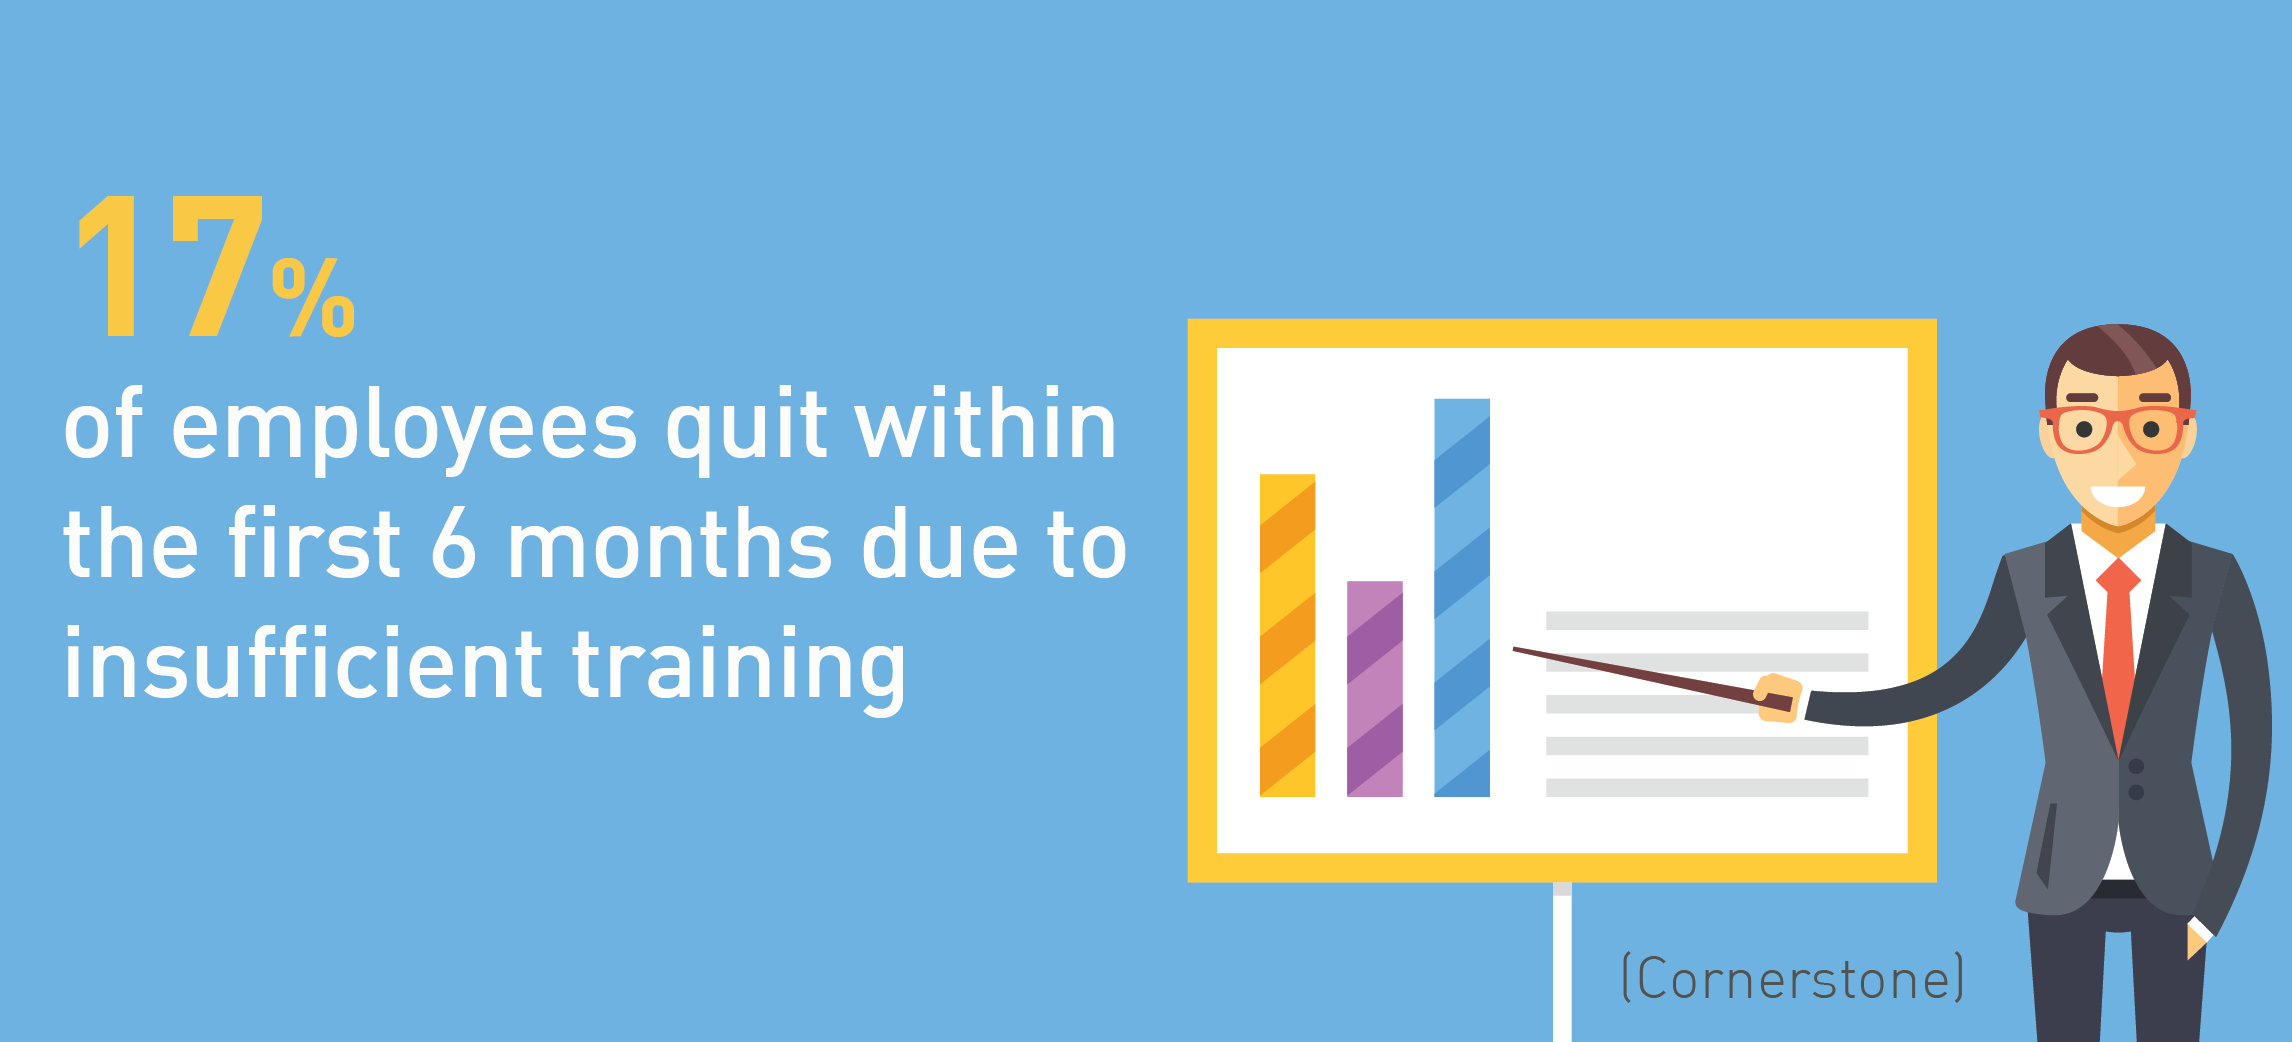 17% of new hires quit within the first 6 months due to insufficient training